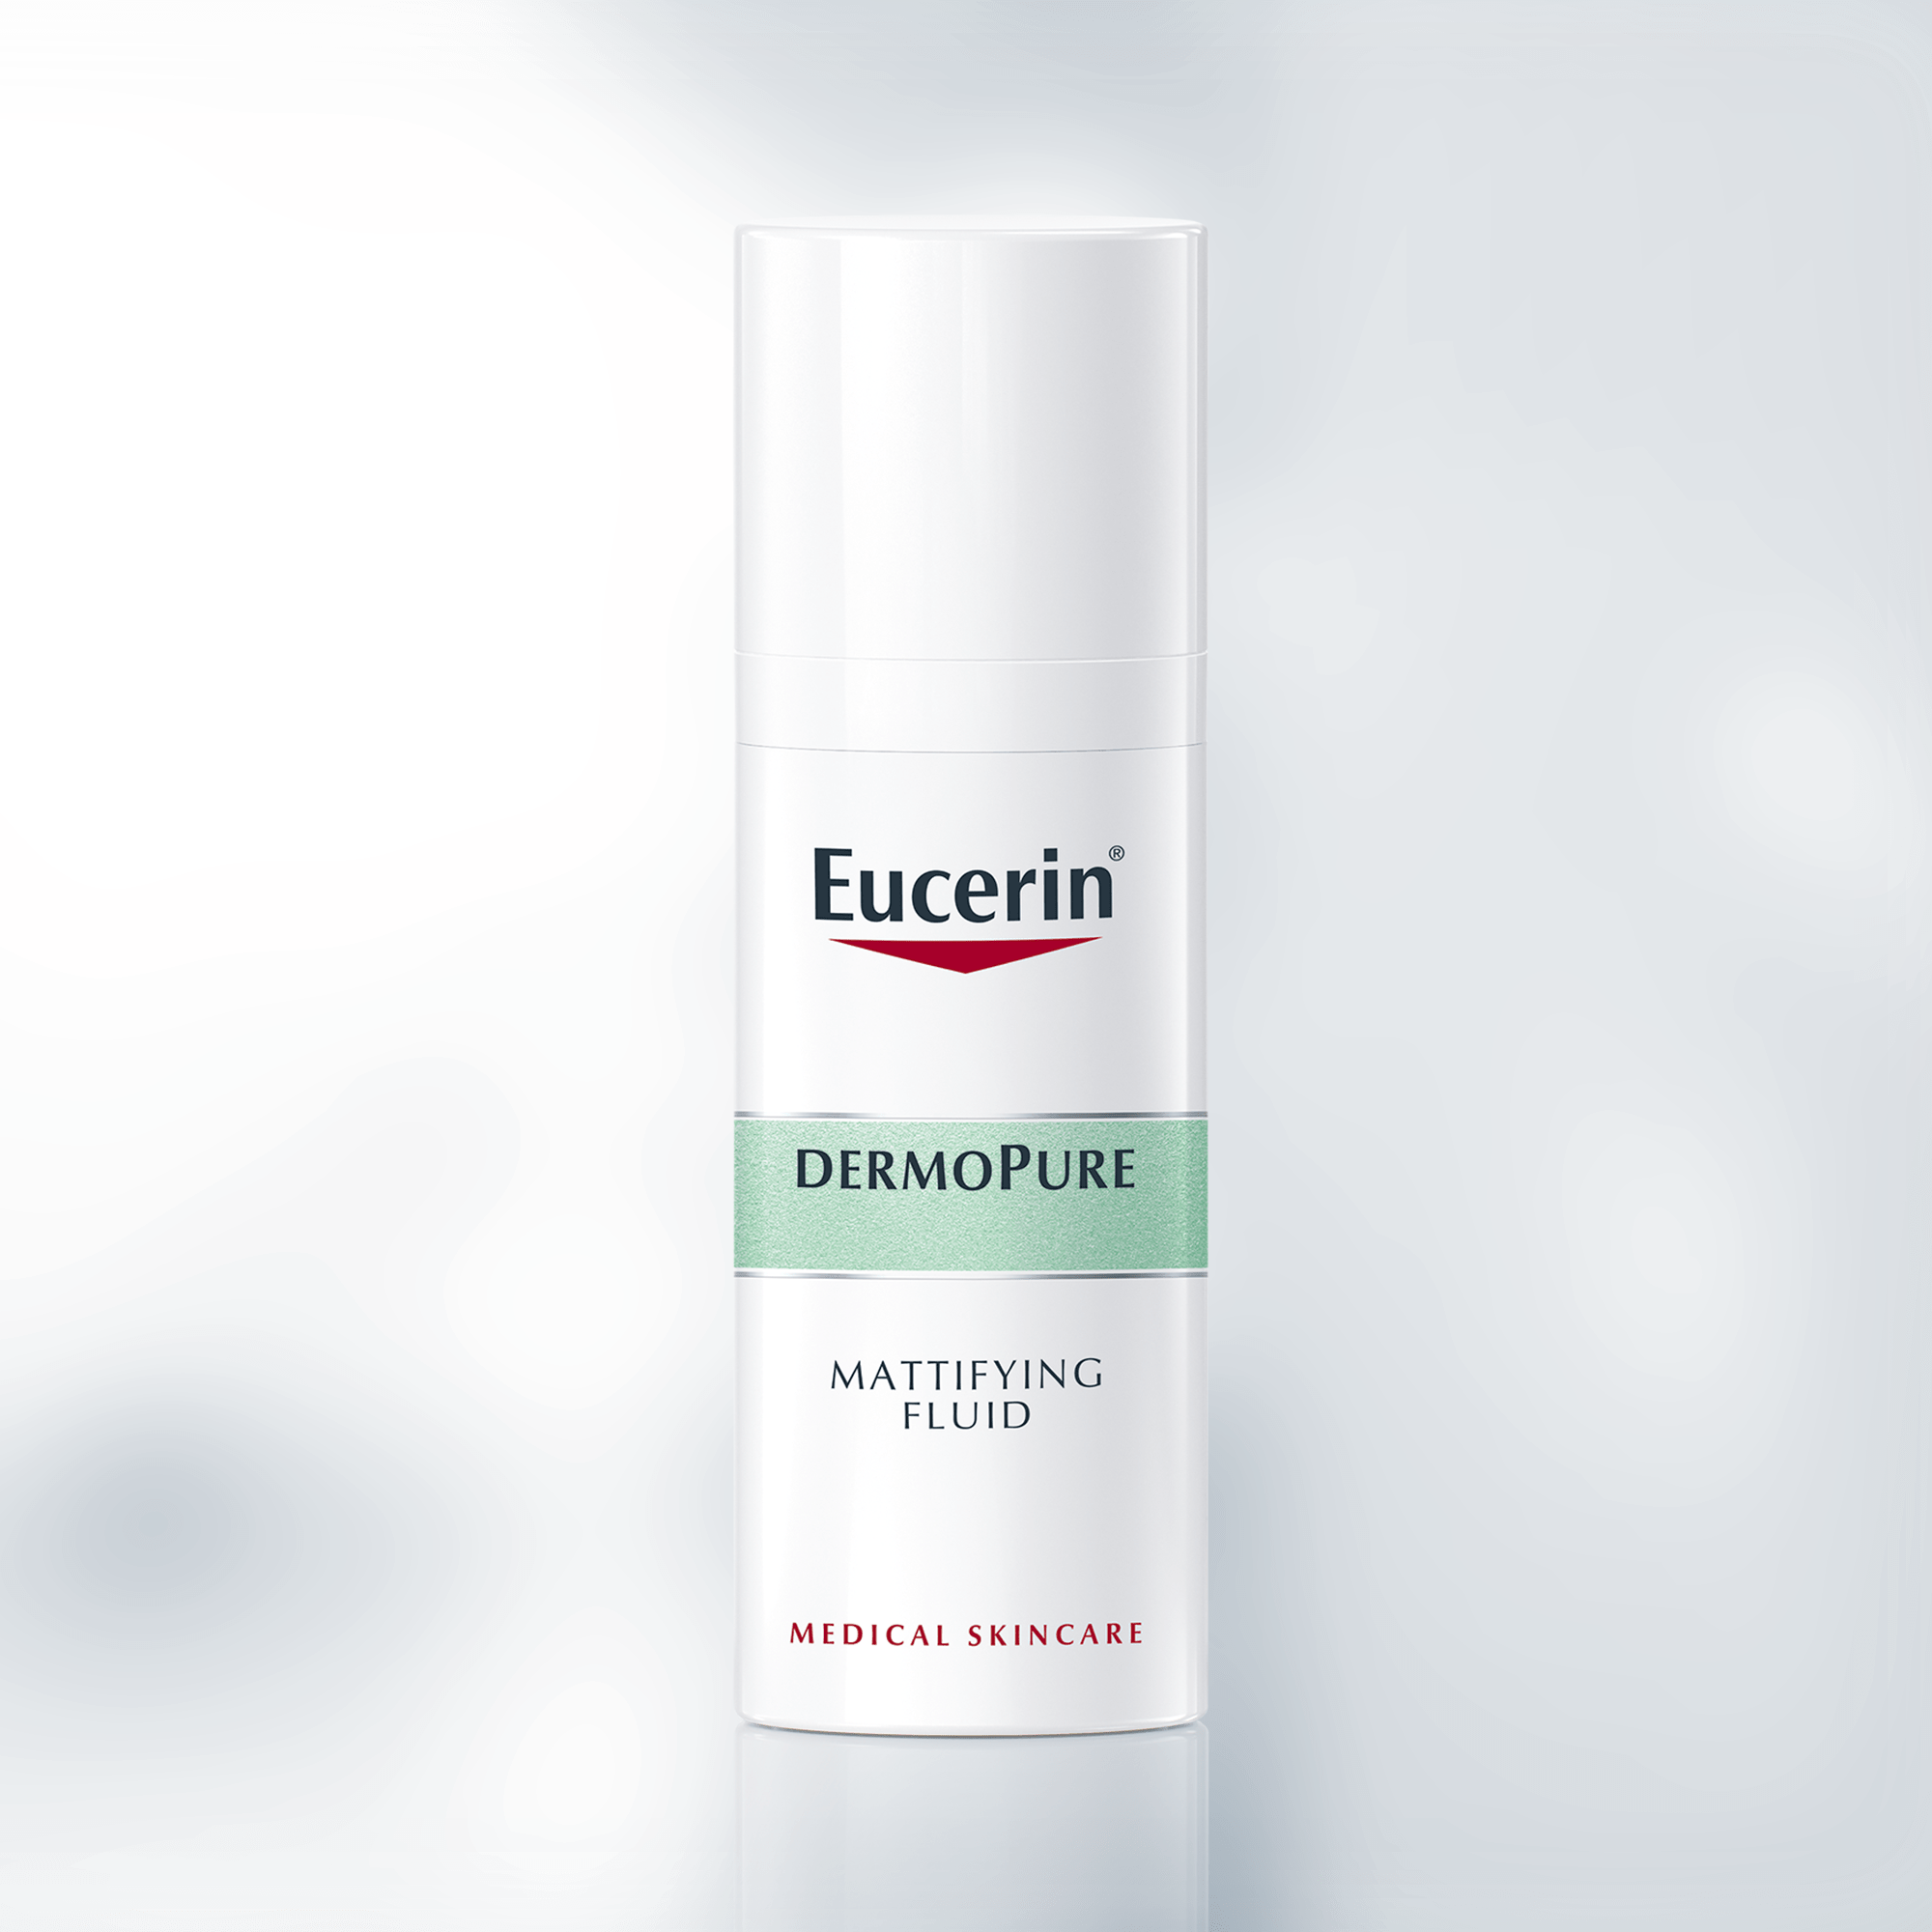 A mattifying fluid for skin with an 8 anti-shine effect that helps reduce blemishes and diminishes excess sebum